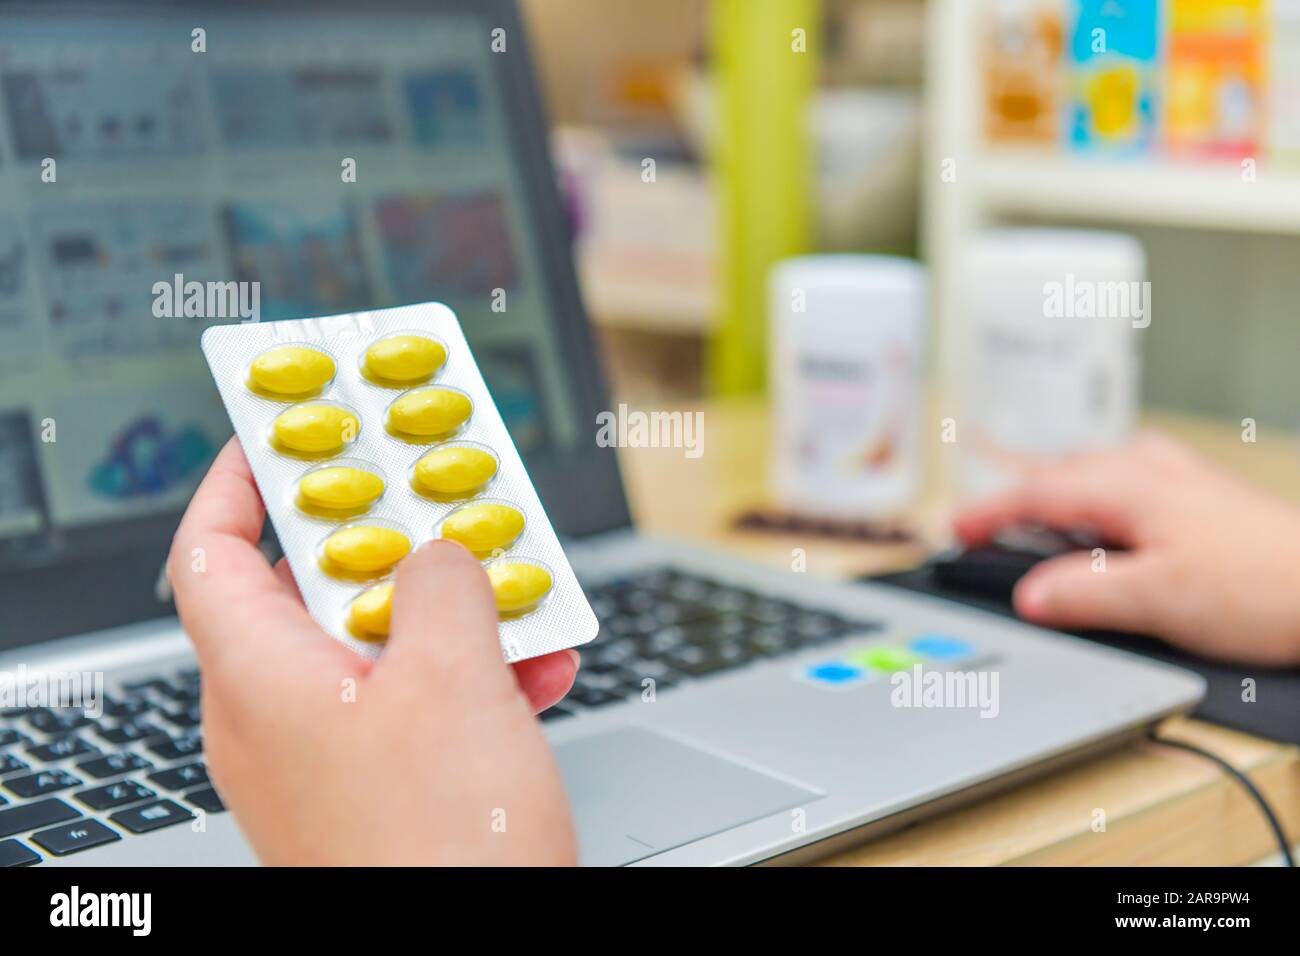 Pharmacist using the computer laptop in chemist shop or pharmacy drug store. Hand holding medicine pack and key the prescription order. Stock Photo